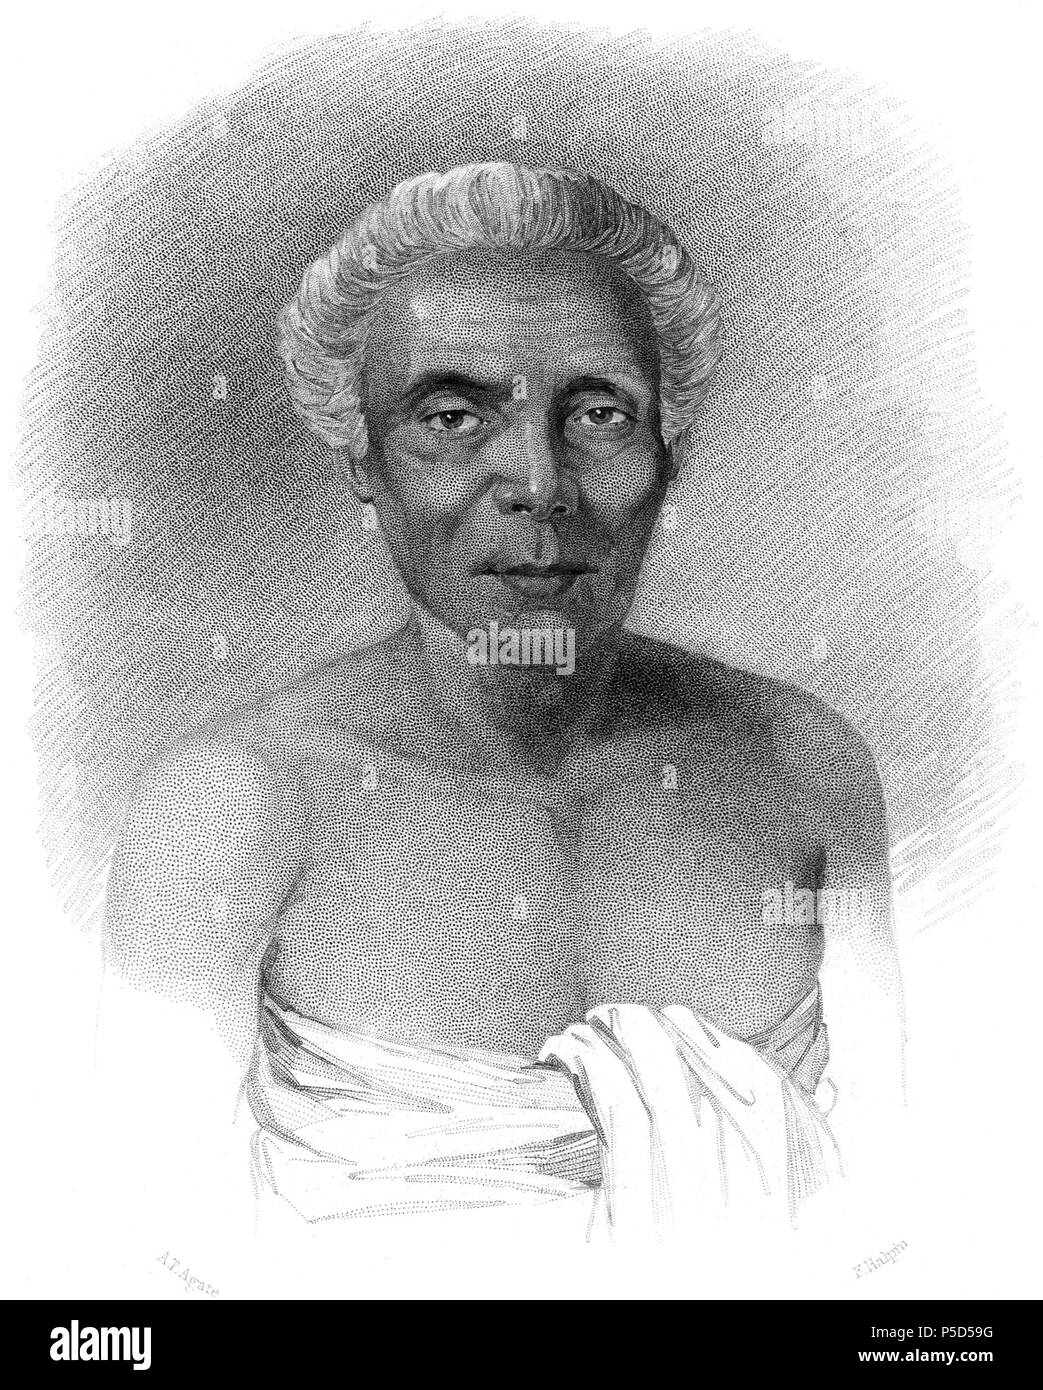 N/A. English: High Chief Malietoa of Upolu. Drawn by Alfred Thomas Agate. Engraved by Jordan and Halpin. circa 1845. Drawn by   Alfred Thomas Agate  (1812–1846)     Alternative names Alfred T. Agate; Alfred Agate  Description American explorer, artist, painter and scientific illustrator  Date of birth/death 14 February 1812 5 January 1846  Location of birth/death Sparta, New York Washington, D.C.  Authority control  : Q3373427 VIAF:58617658 ISNI:0000 0001 1651 2965 ULAN:500116915 LCCN:no00013056 NLA:35674068 WorldCat    . Engraved by Jordan and Halpin 338 Chief Malietoa by Alfred Agate Stock Photo